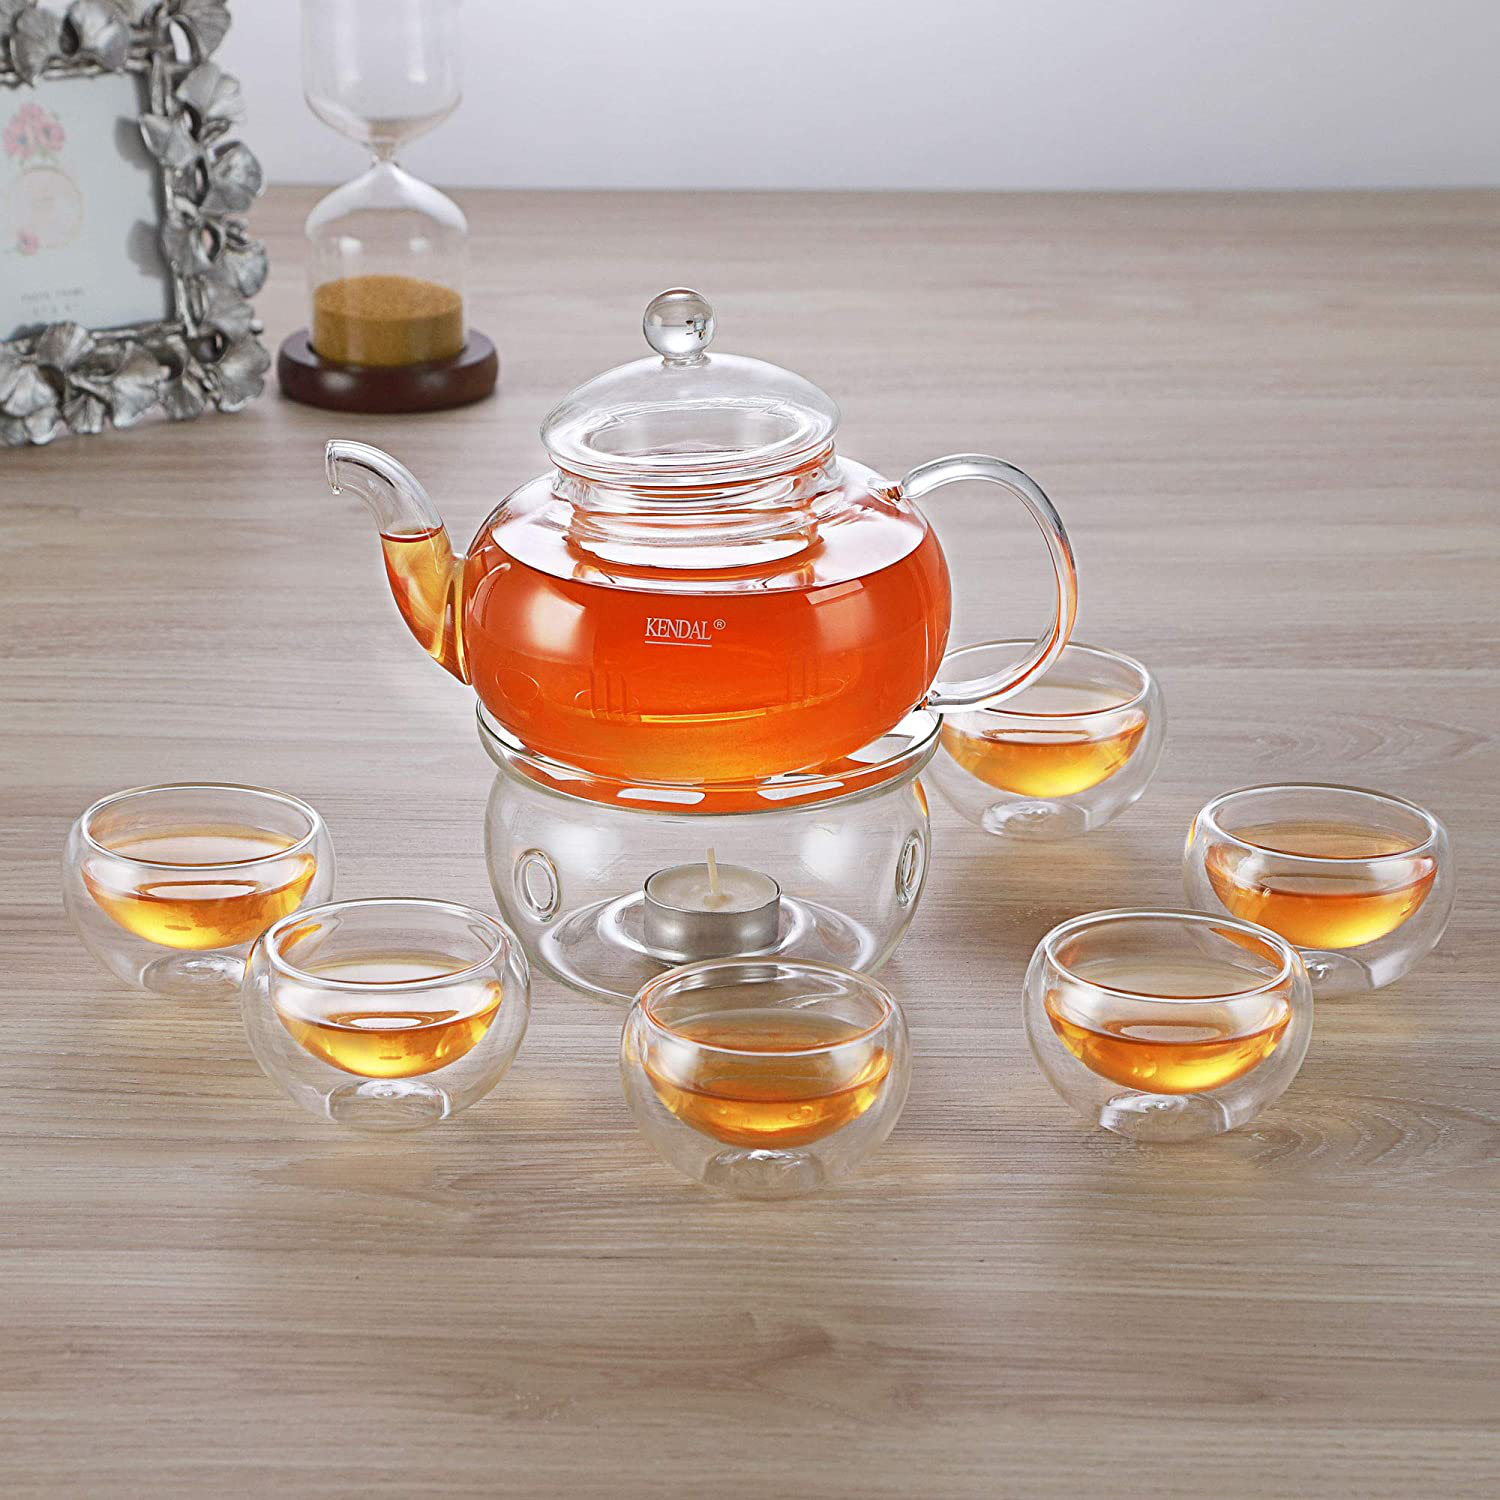 Wayfair, Clear Teapots, Up to 65% Off Until 11/20